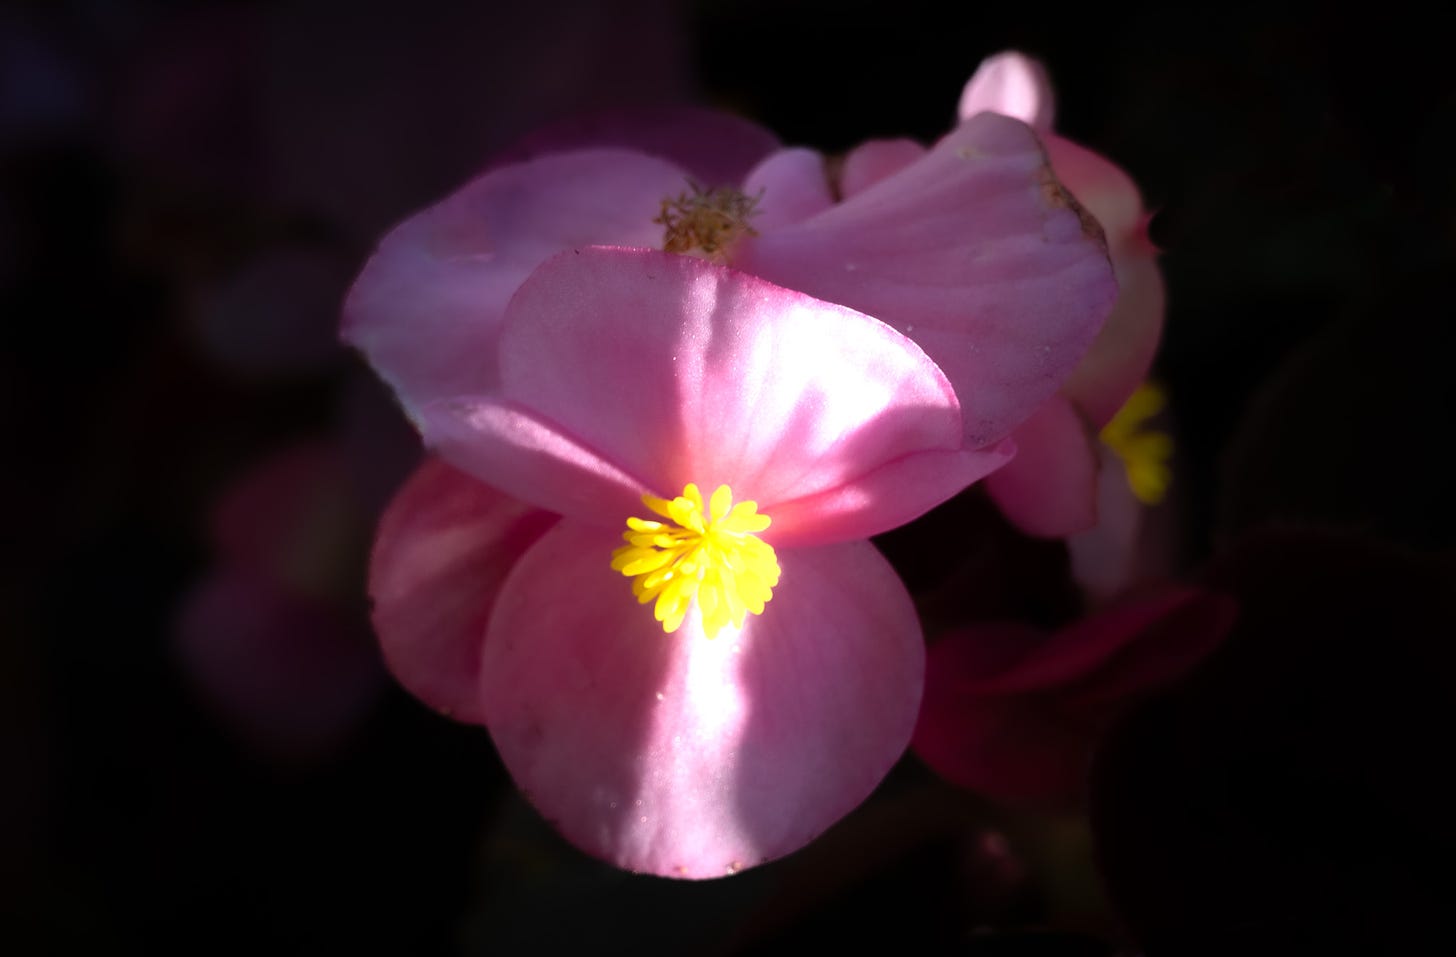 A single pink begonia blossom with a shaft of sunlight lighting the middle of the bloom against a dark background